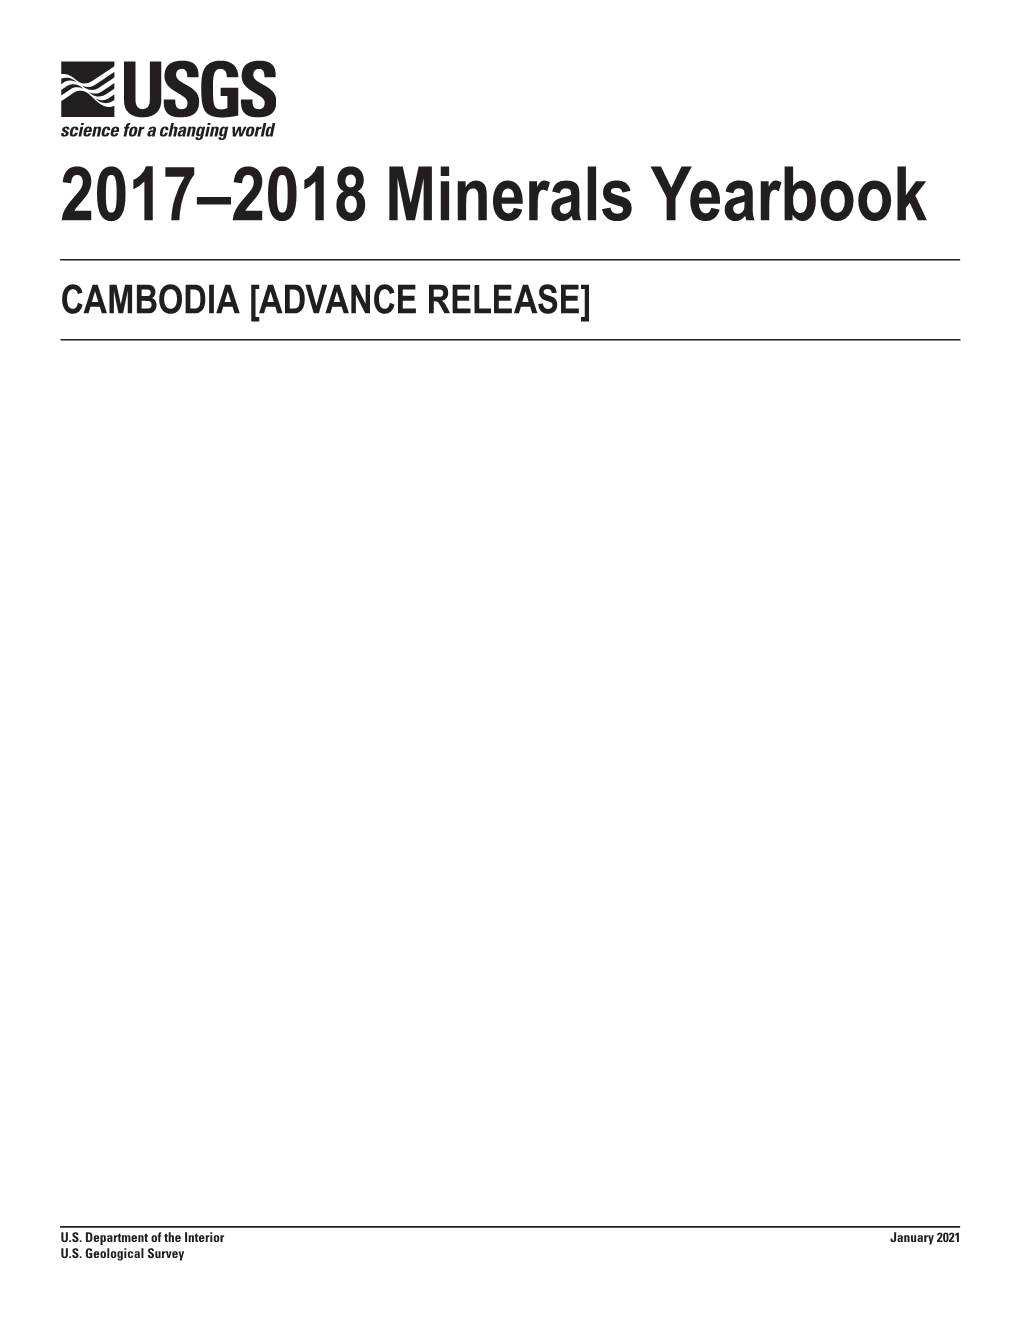 The Mineral Industry of Cambodia in 2017-2018